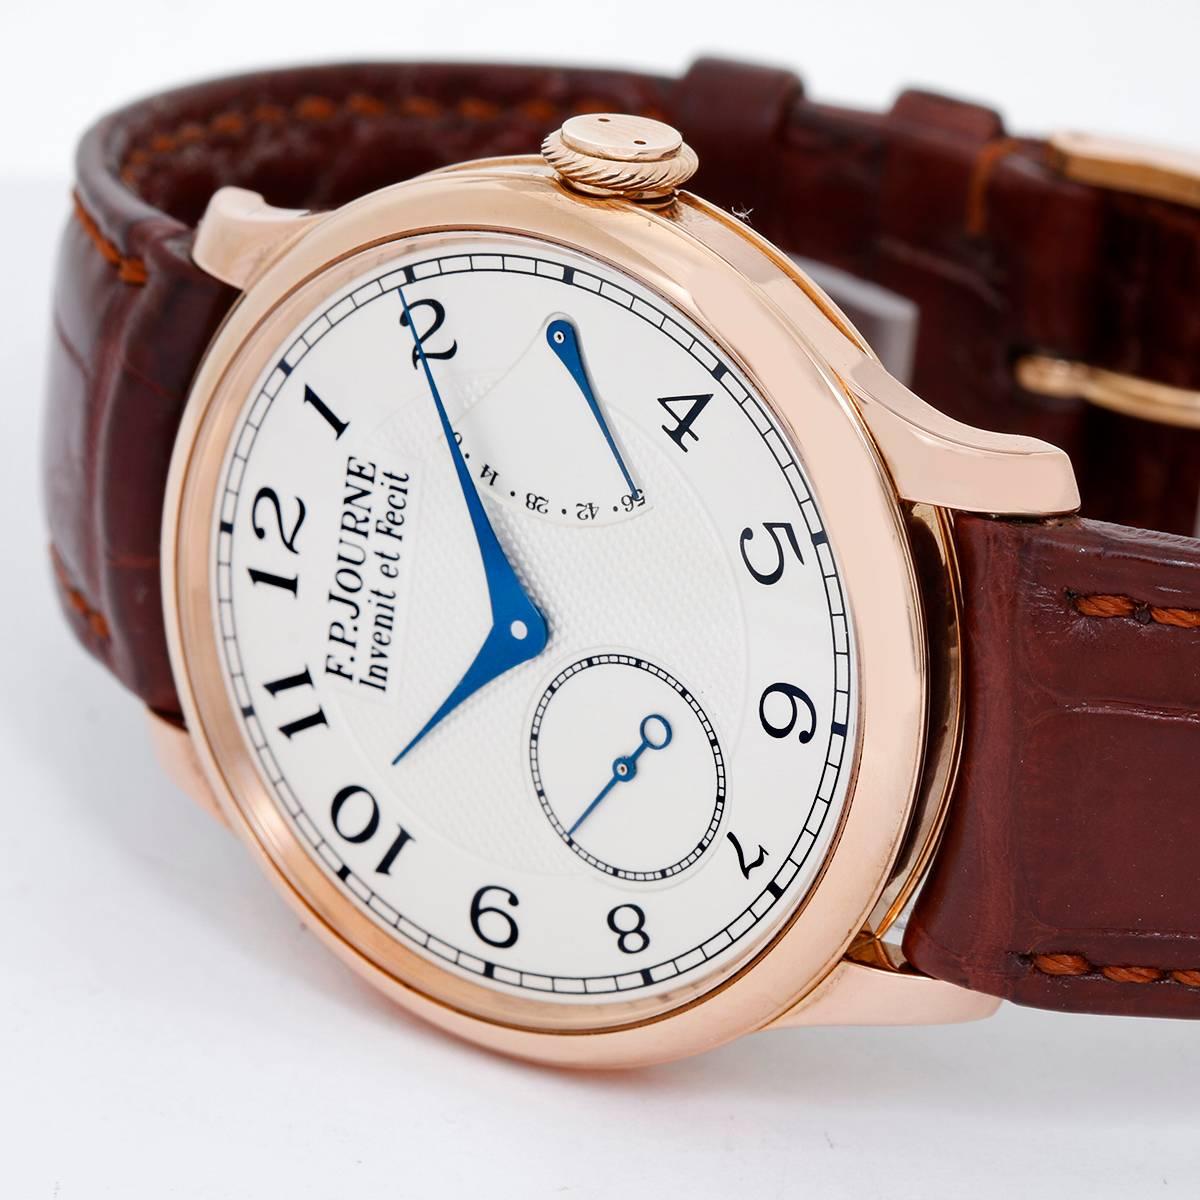 F.P. Journe Chronometre Souverain 18K Rose Gold -  Manual winding. 18K Rose gold ( 38 mm ) Skeleton case back. Silvered dial with Arabic numerals; center guilloche pattern texture ; two small subdials. Brown F.P. Journe leather strap with 18K Rose